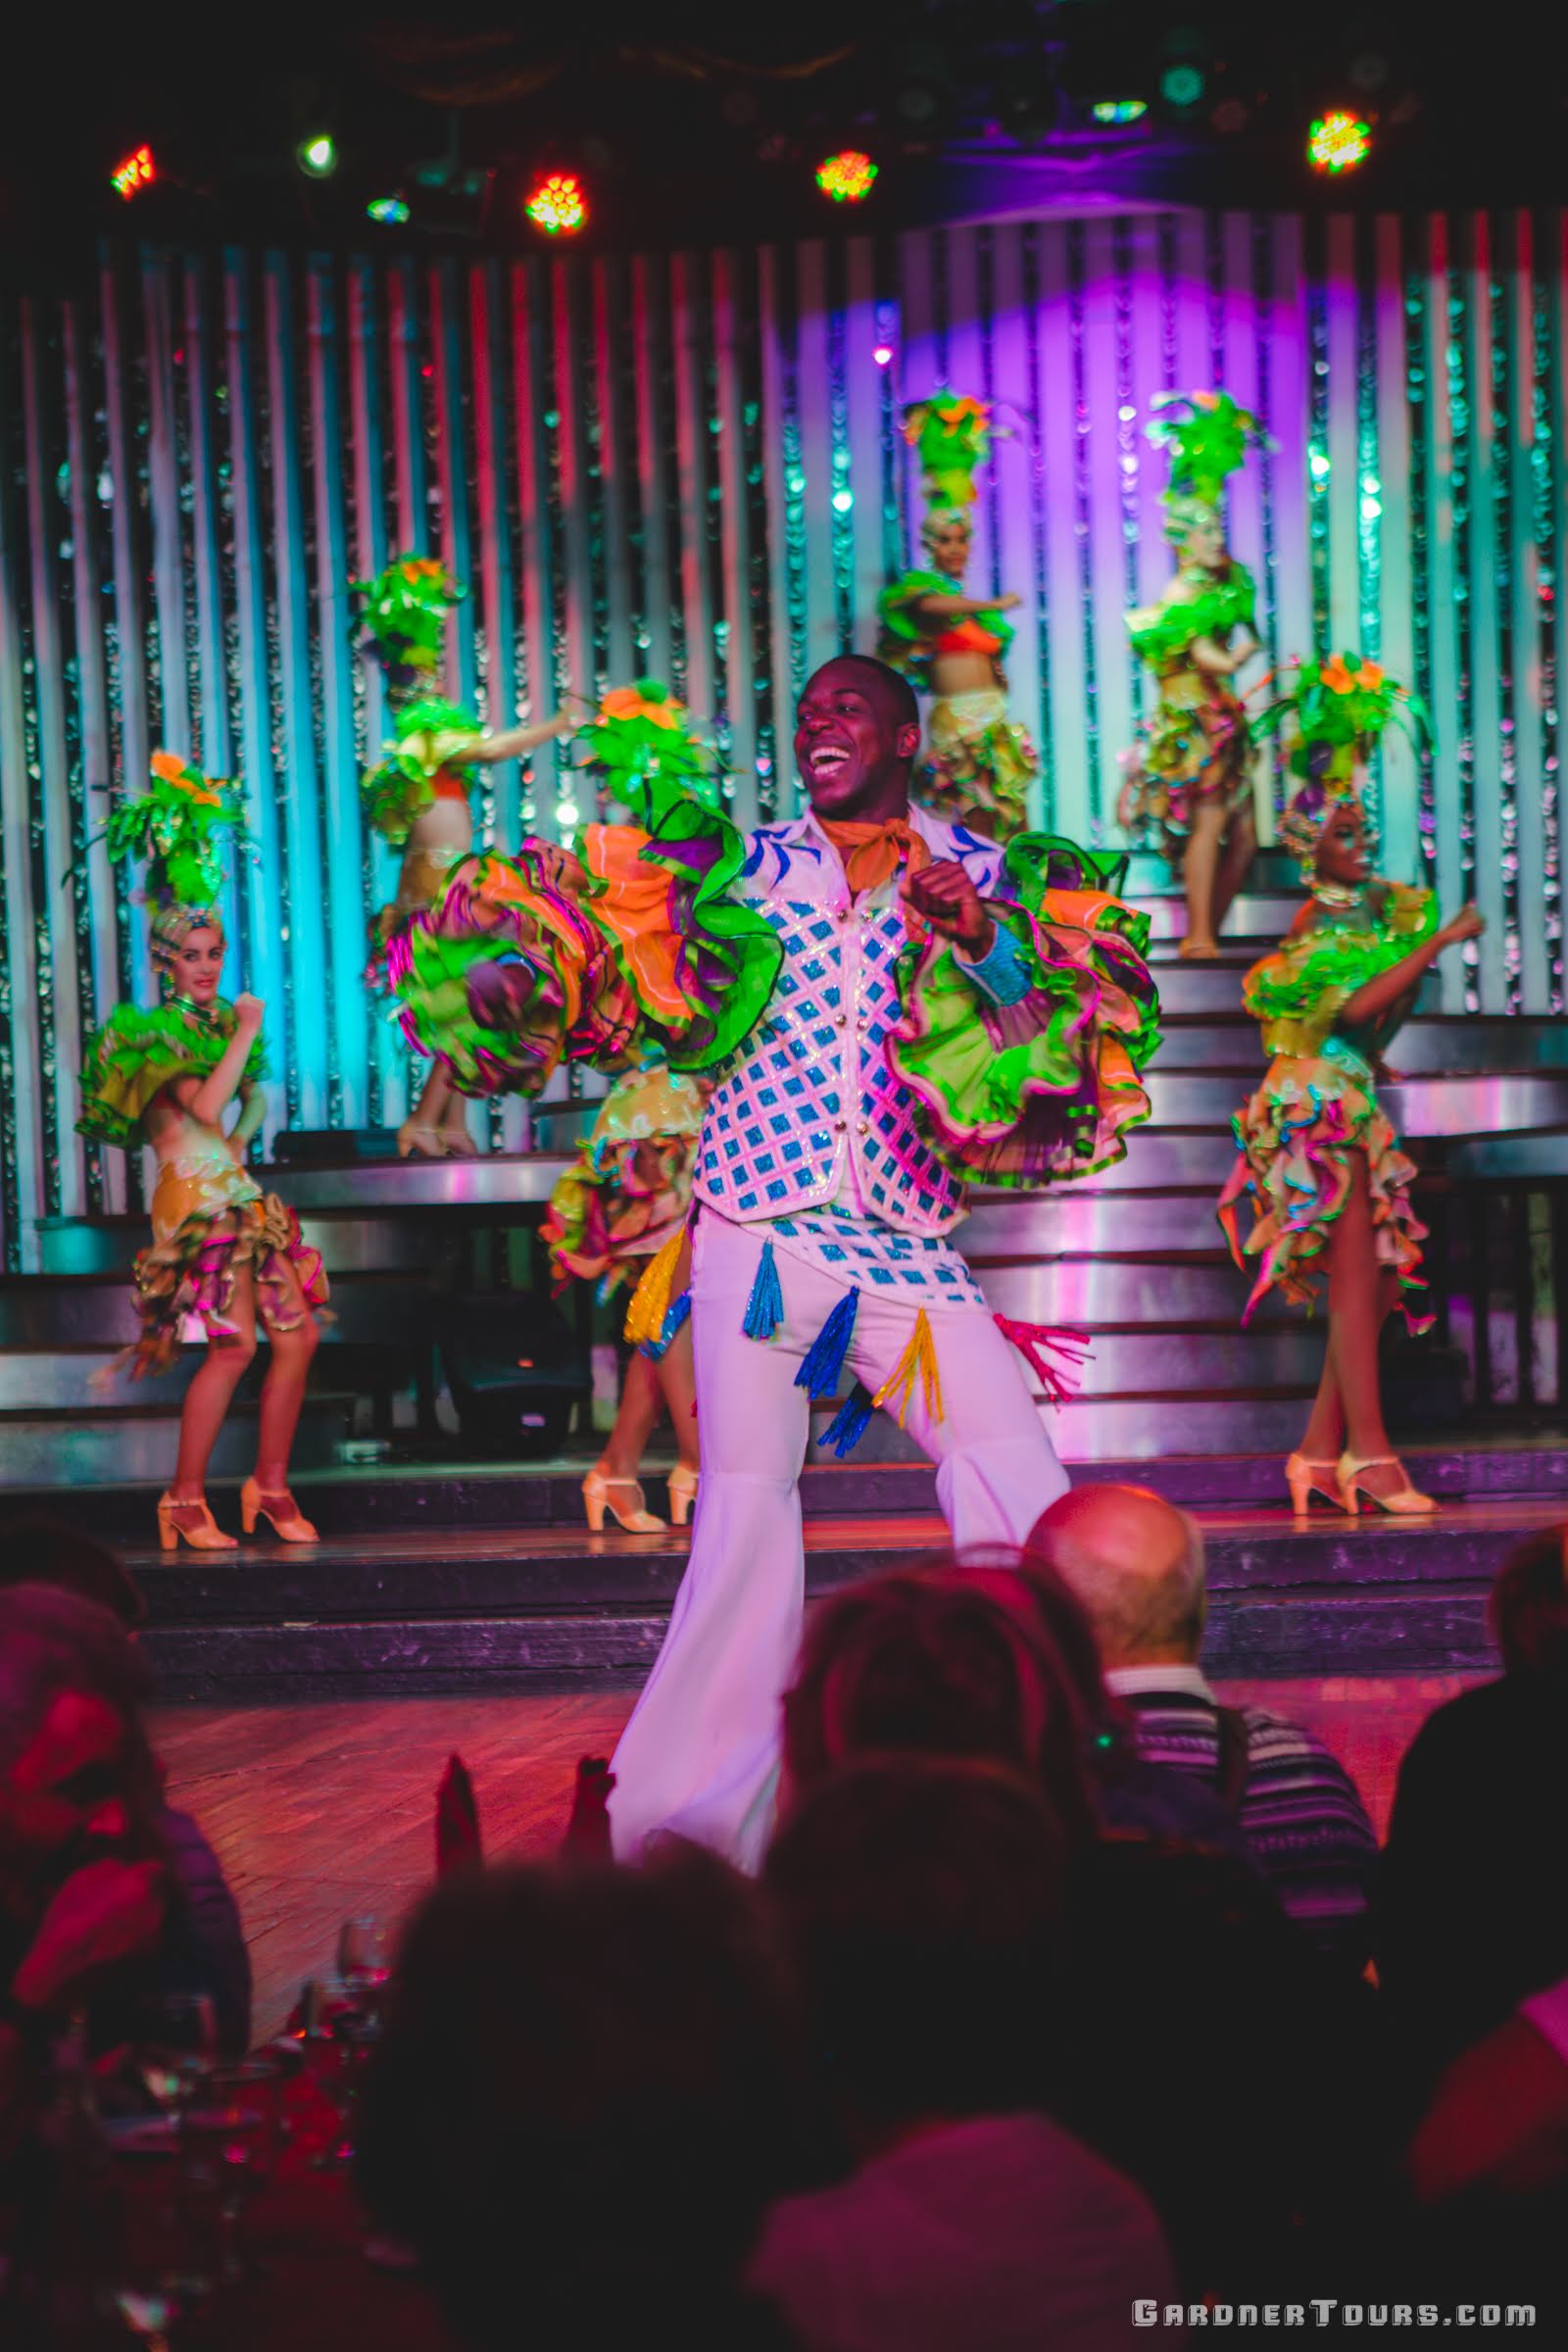 Lead male singer and many dancers in colorful outfits performing at the Cabaret Parisien's Big Show in the Hotel Nacional in Havana, Cuba